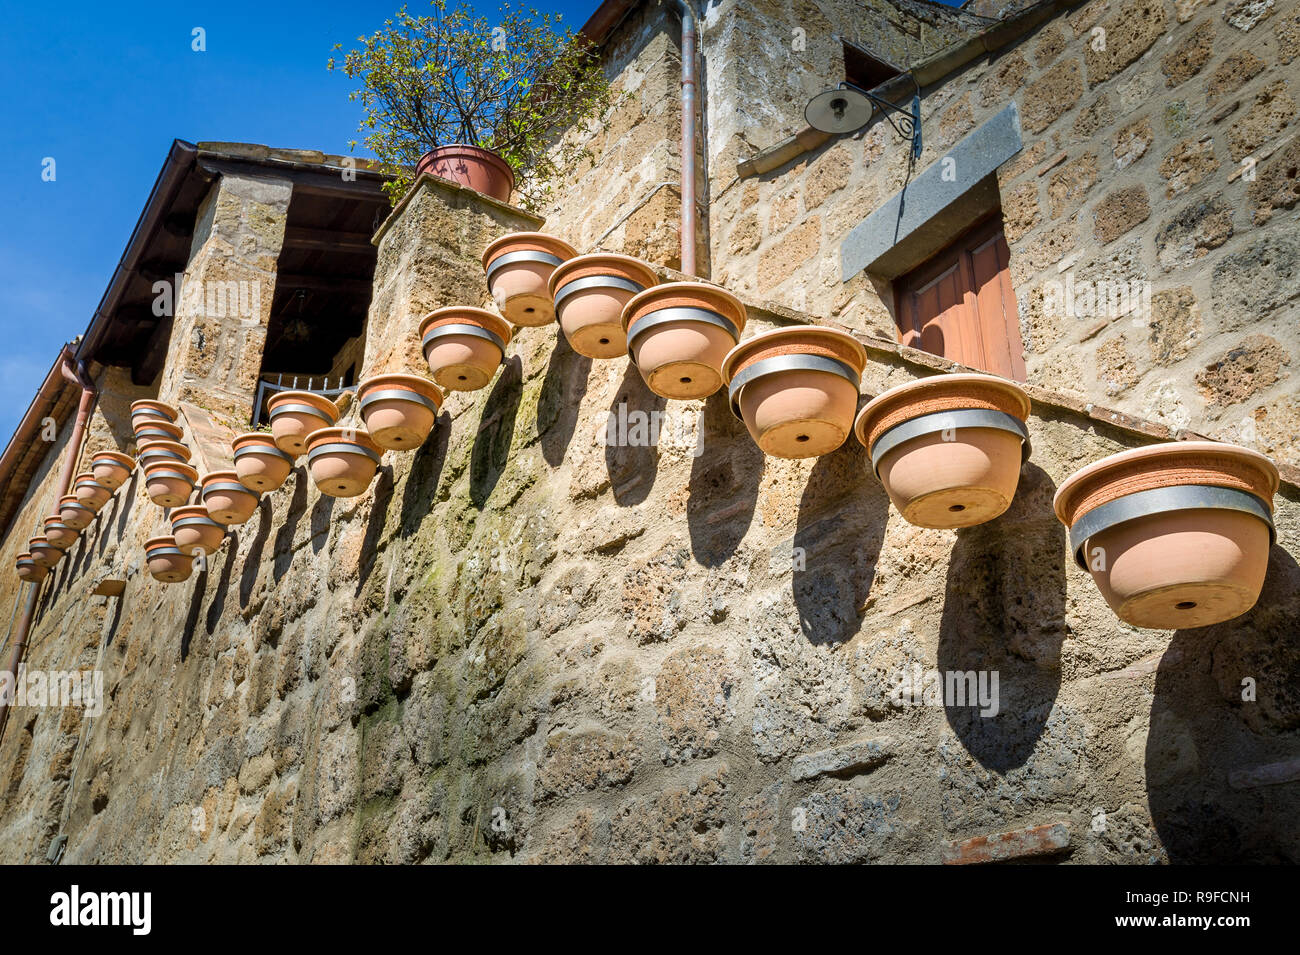 Medieval wall decorated with many flower pots. Civita di Bagnoregio, Tuscany, Italy. Stock Photo